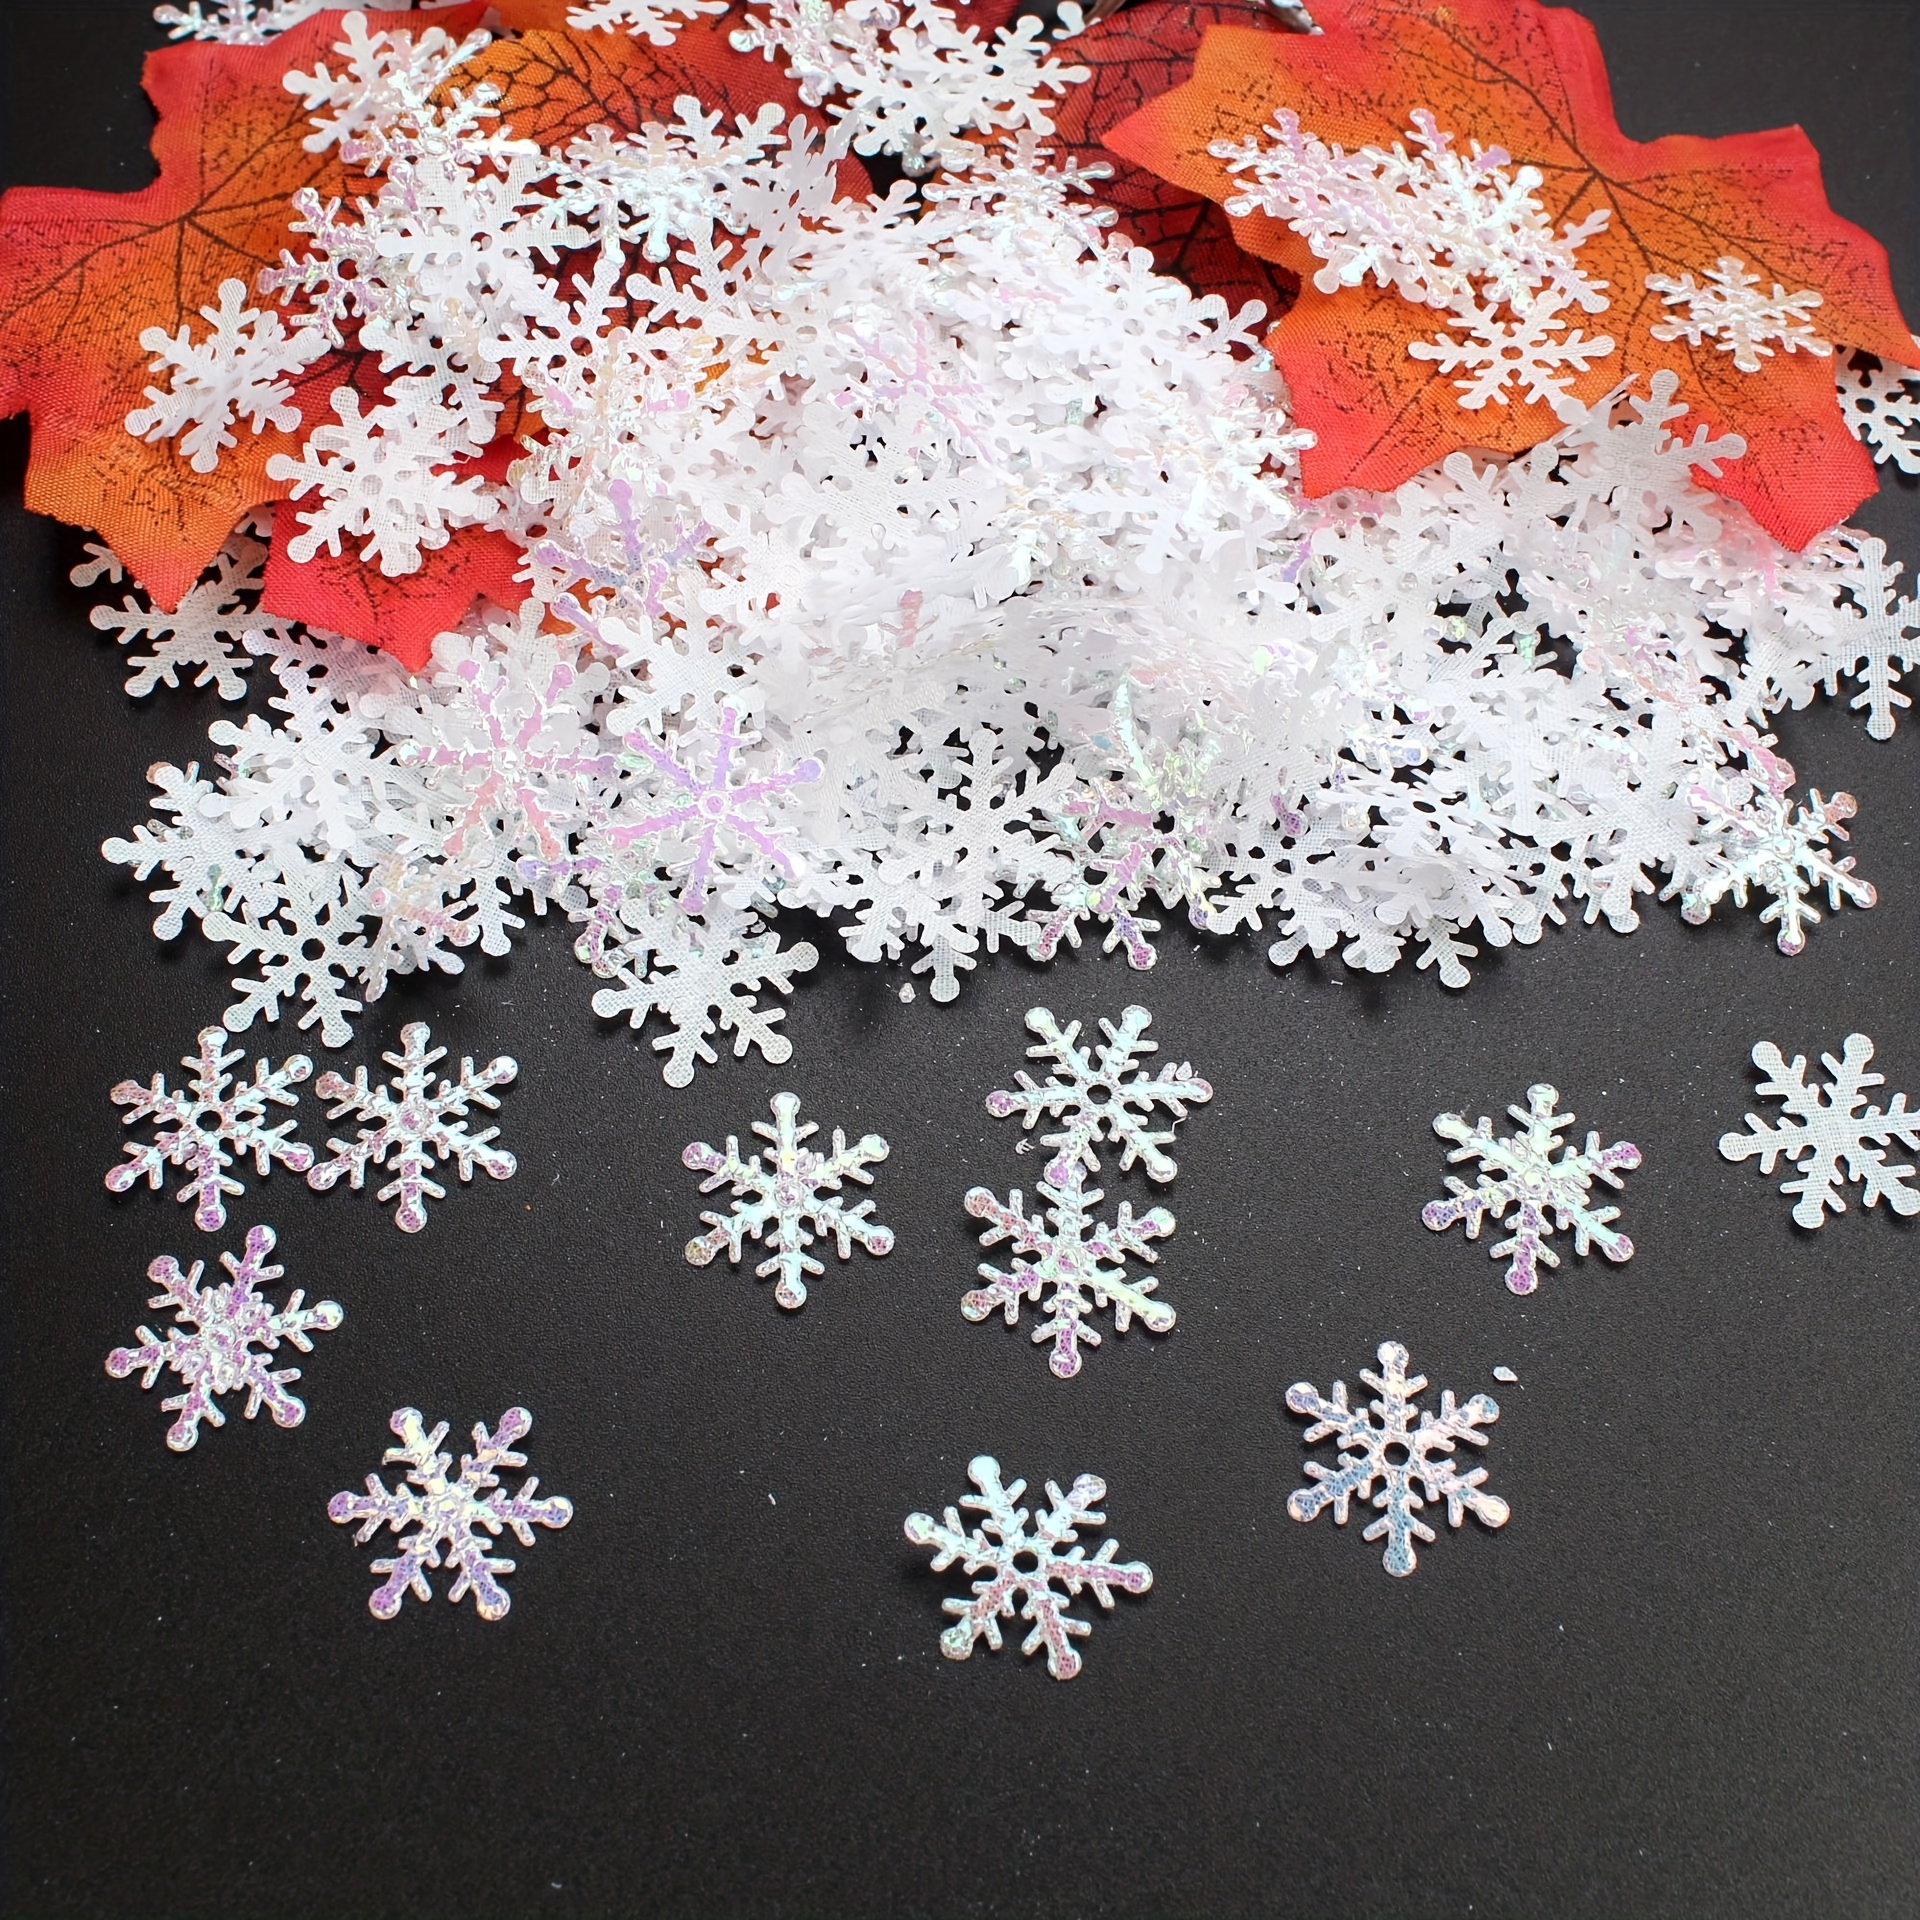  100Pcs Wooden Snowflakes Christmas Snowflakes Ornaments DIY  Crafts Supply Christmas Party Decorations Snowflake Scatters : Arts, Crafts  & Sewing